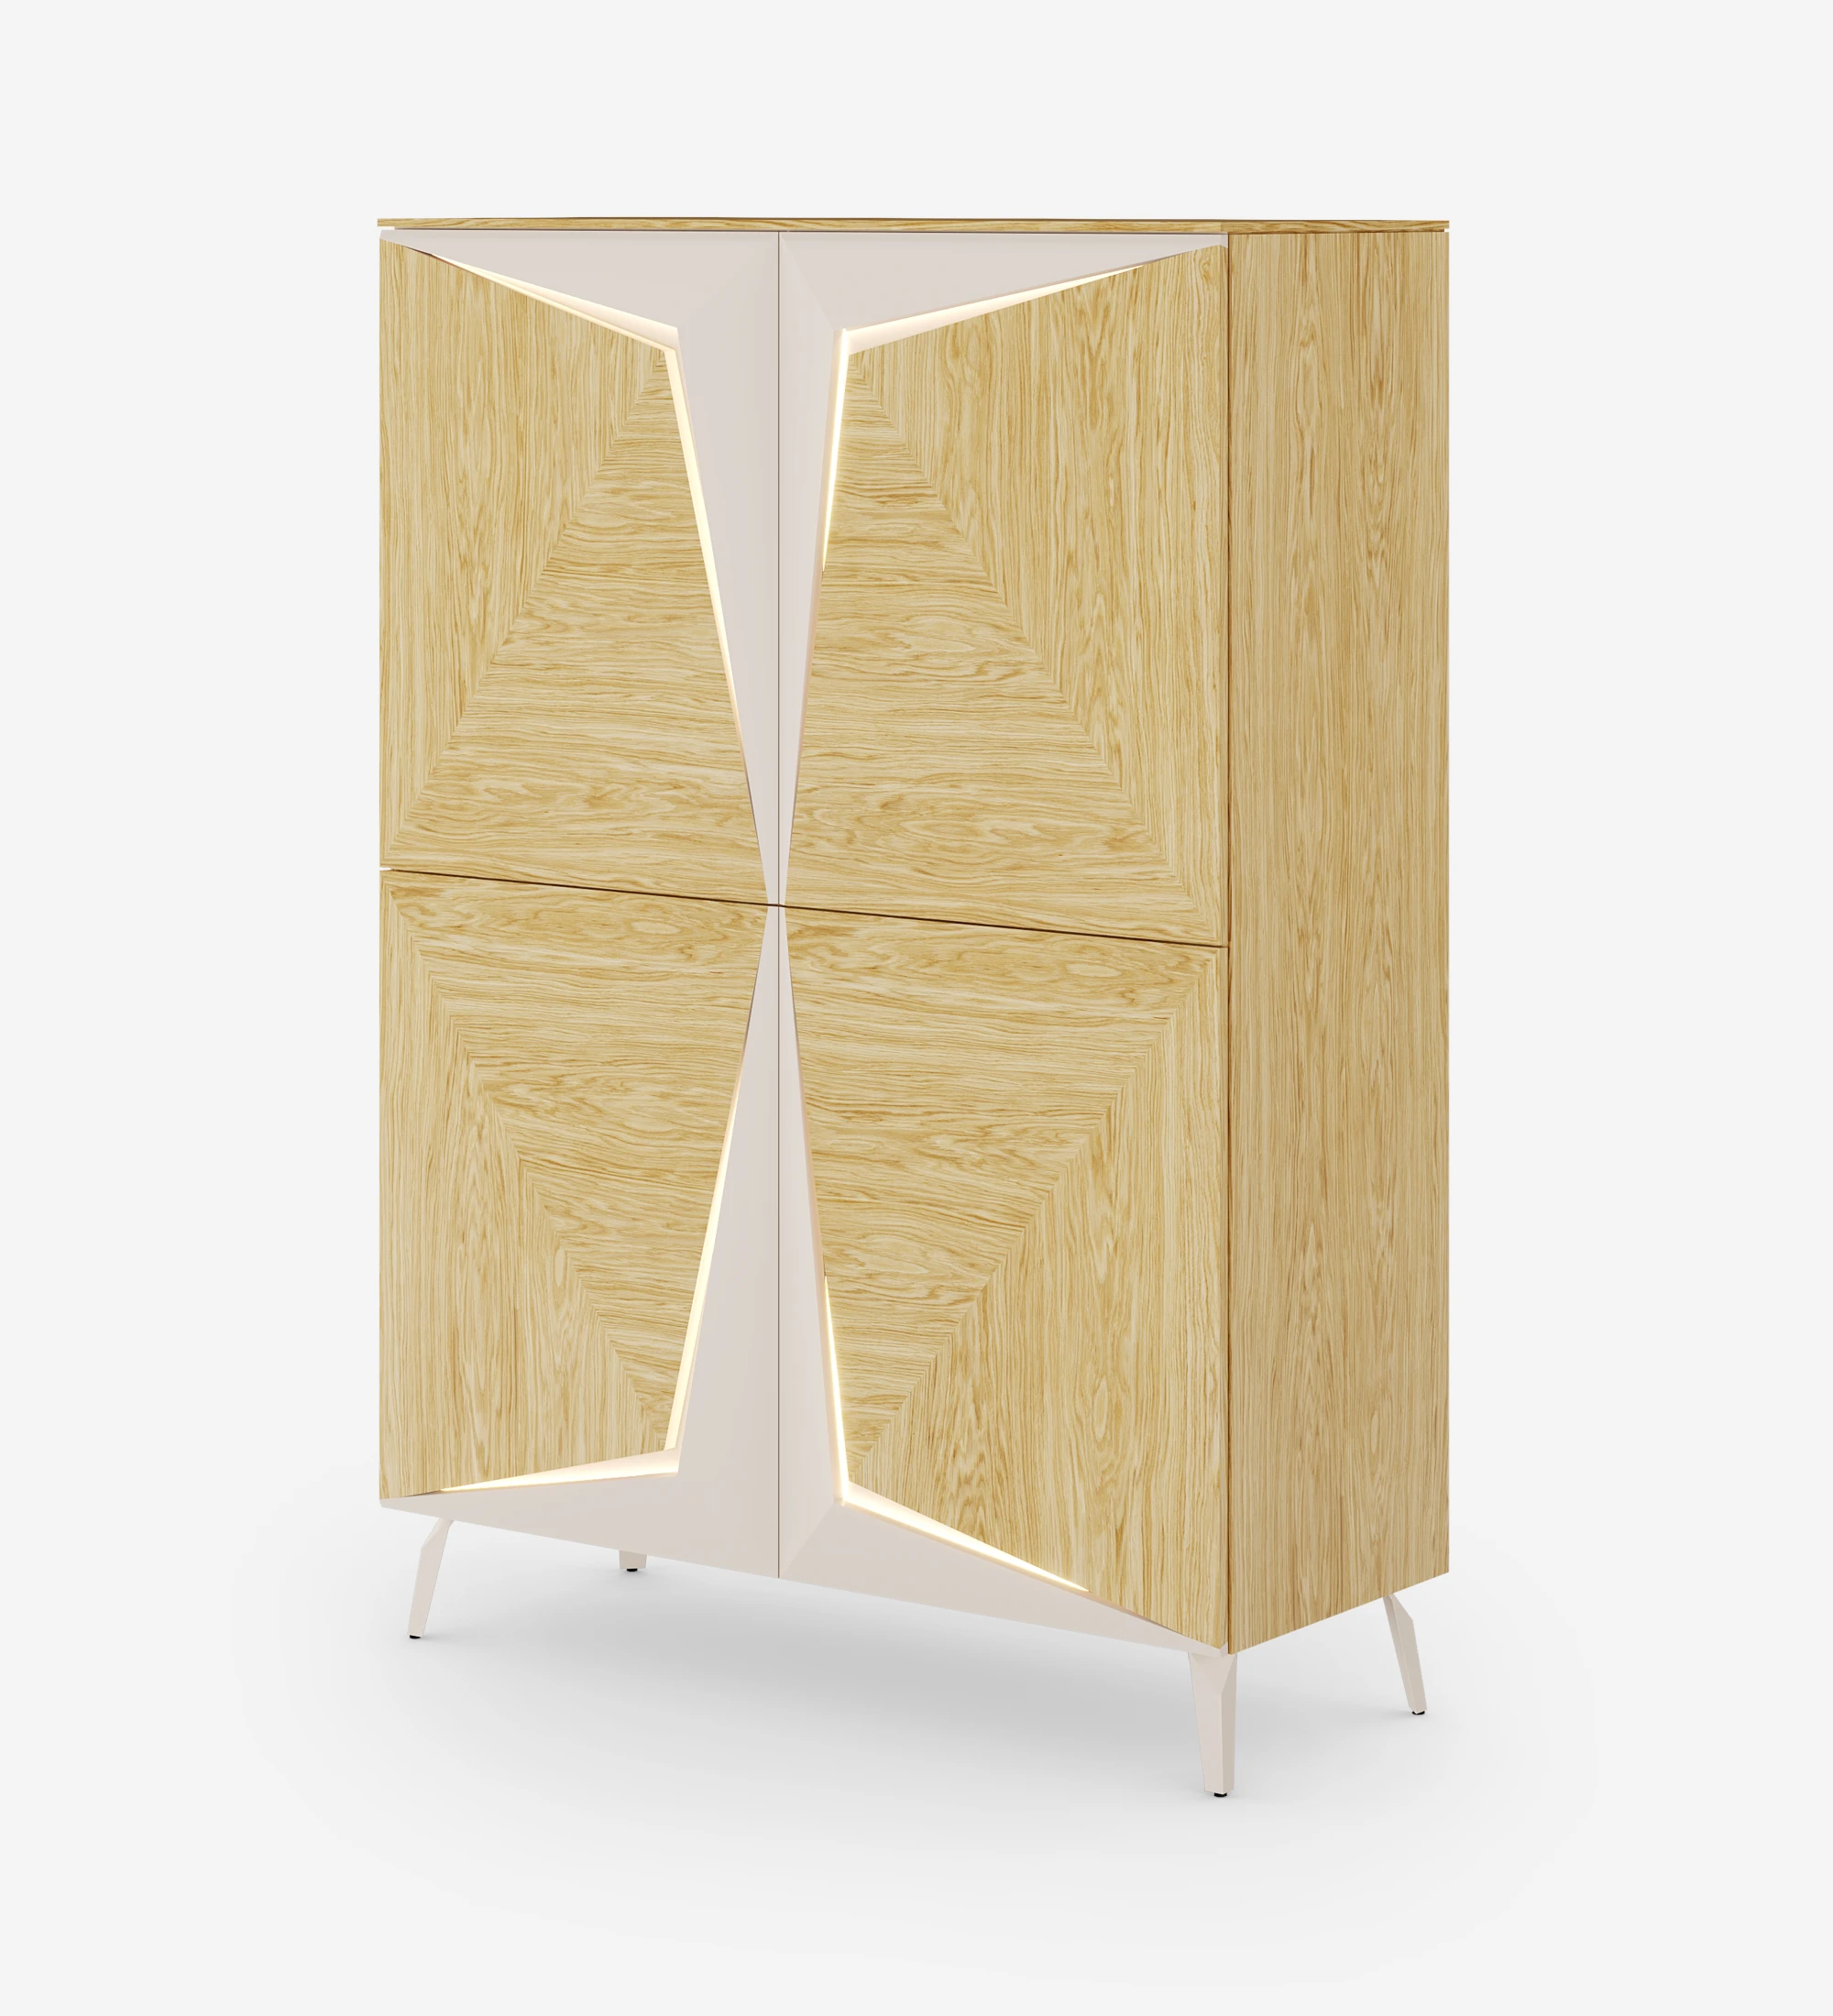 Vajillero with lighting, 4 doors in natural oak with pearl details, with natural oak structure and metal foot lacquered in pearl.